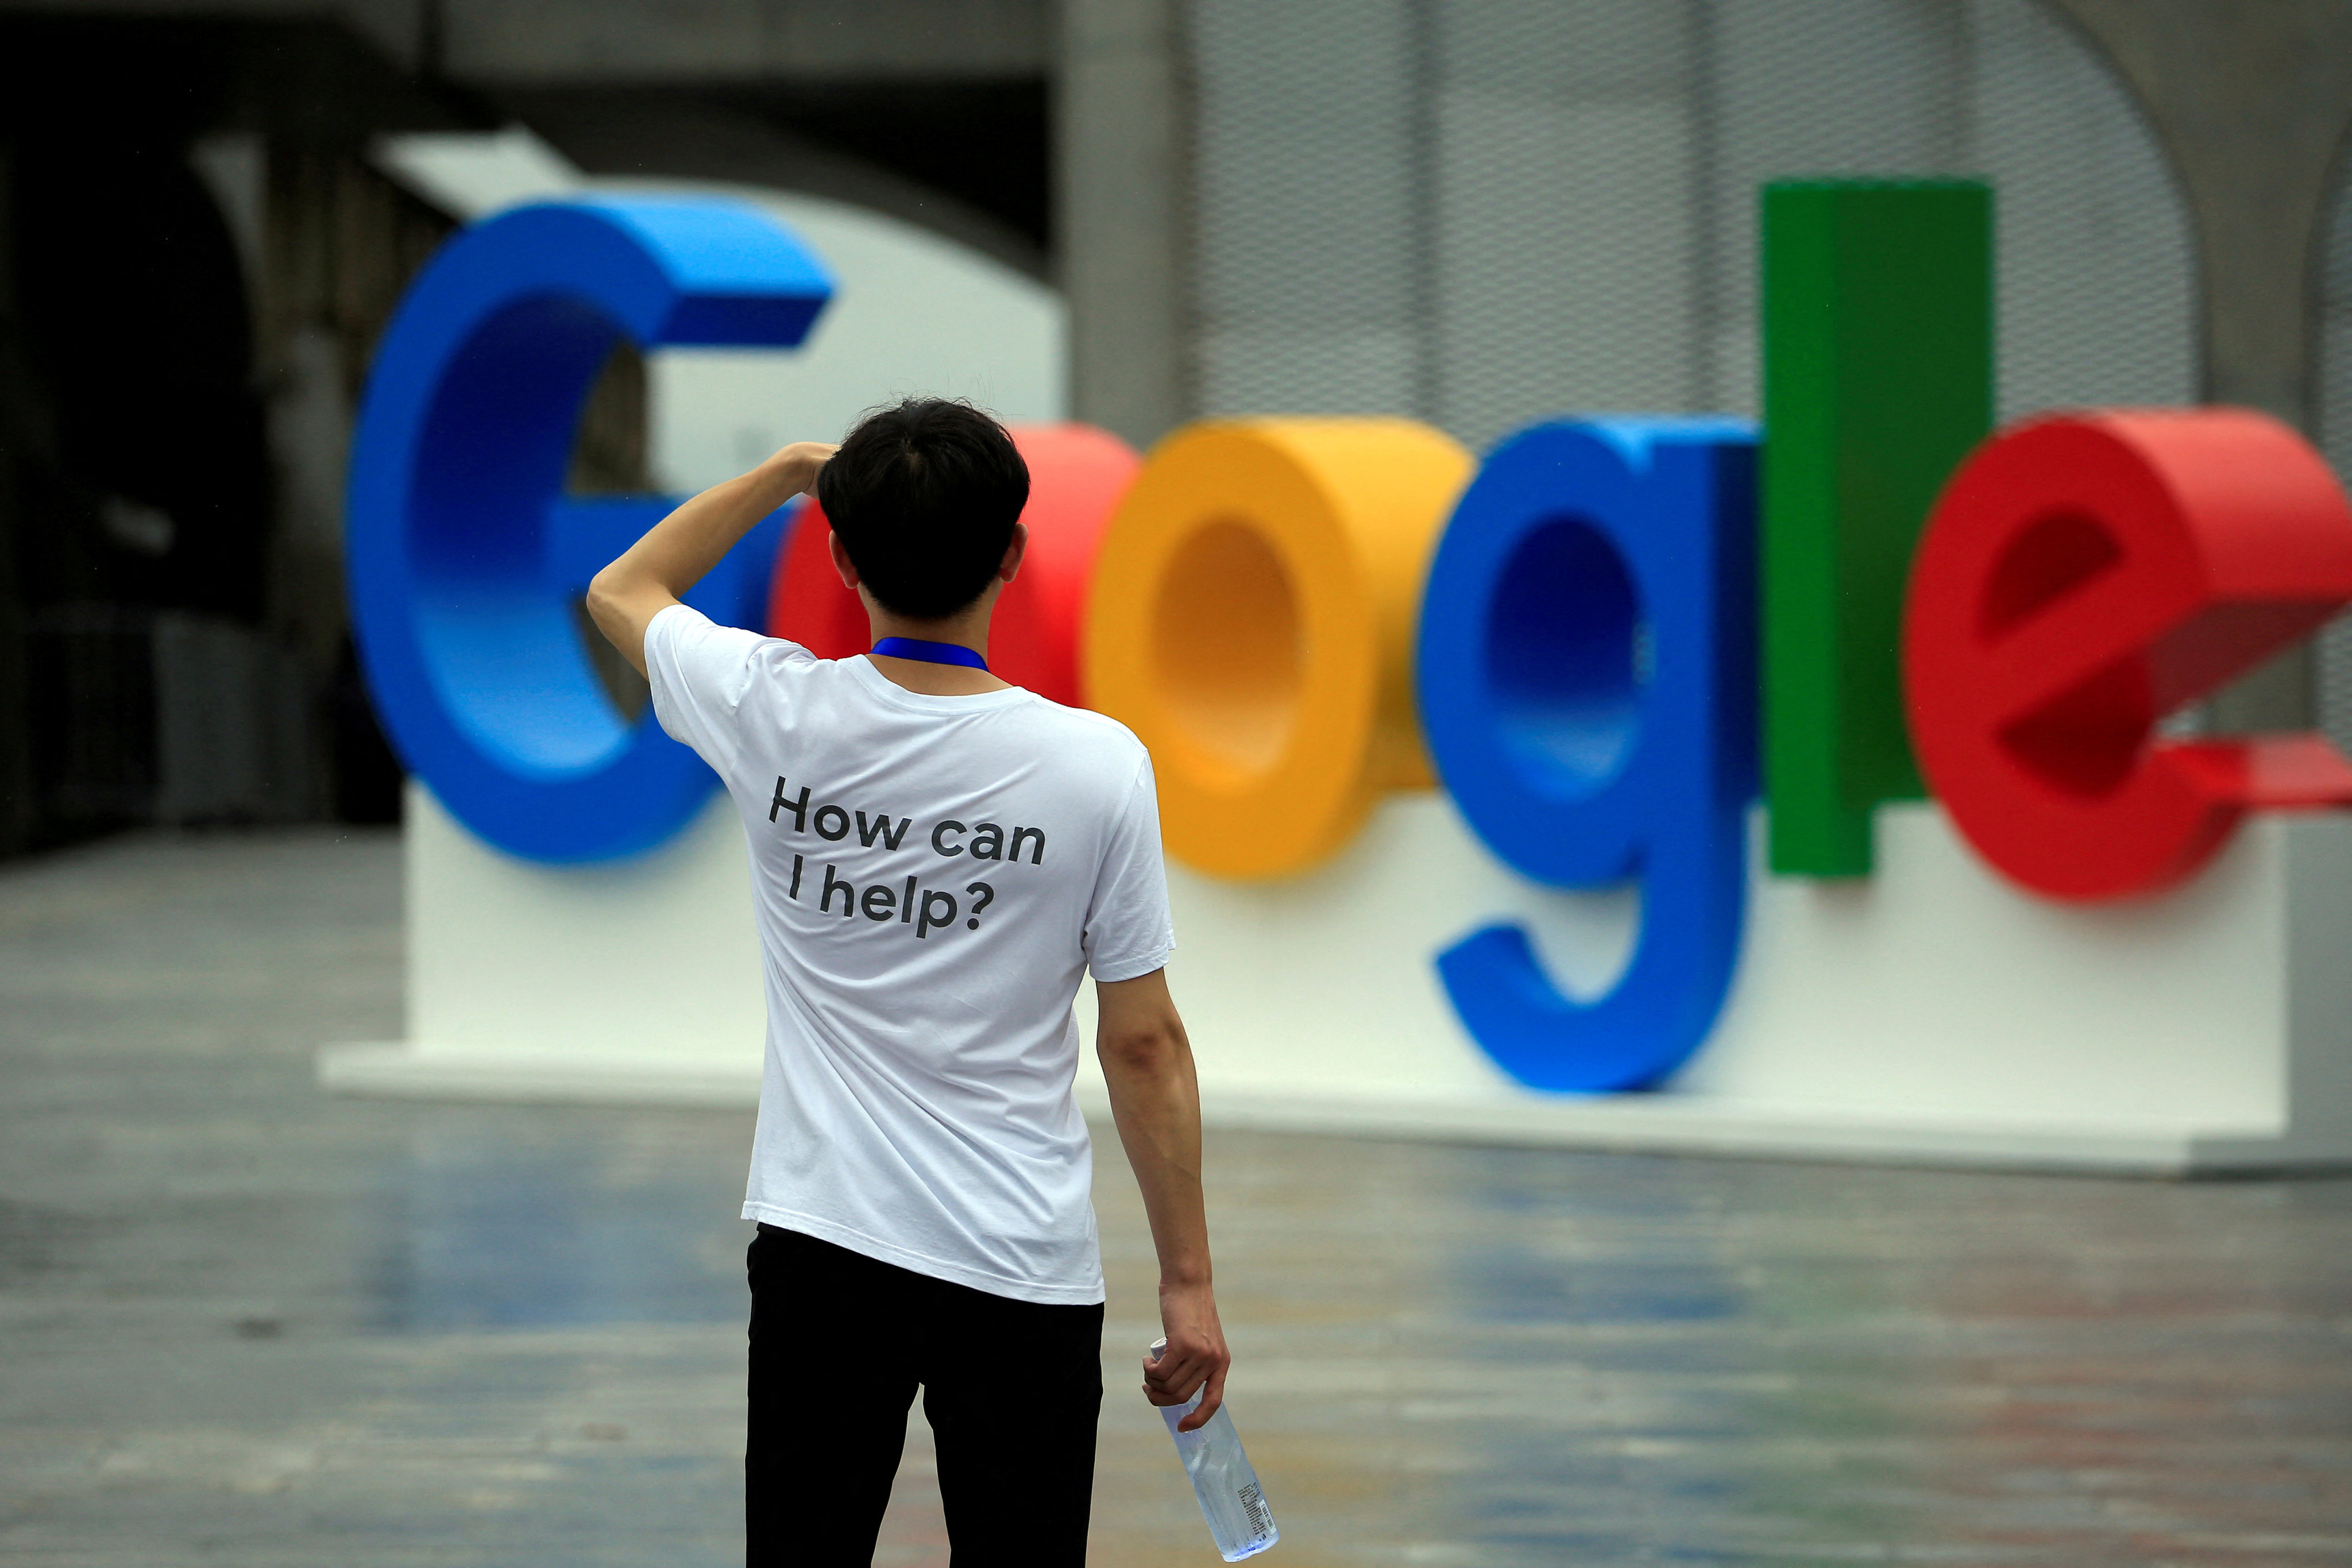 A Google executive says the company is committed to serving the Hong Kong market through its cloud business. Photo: Reuters